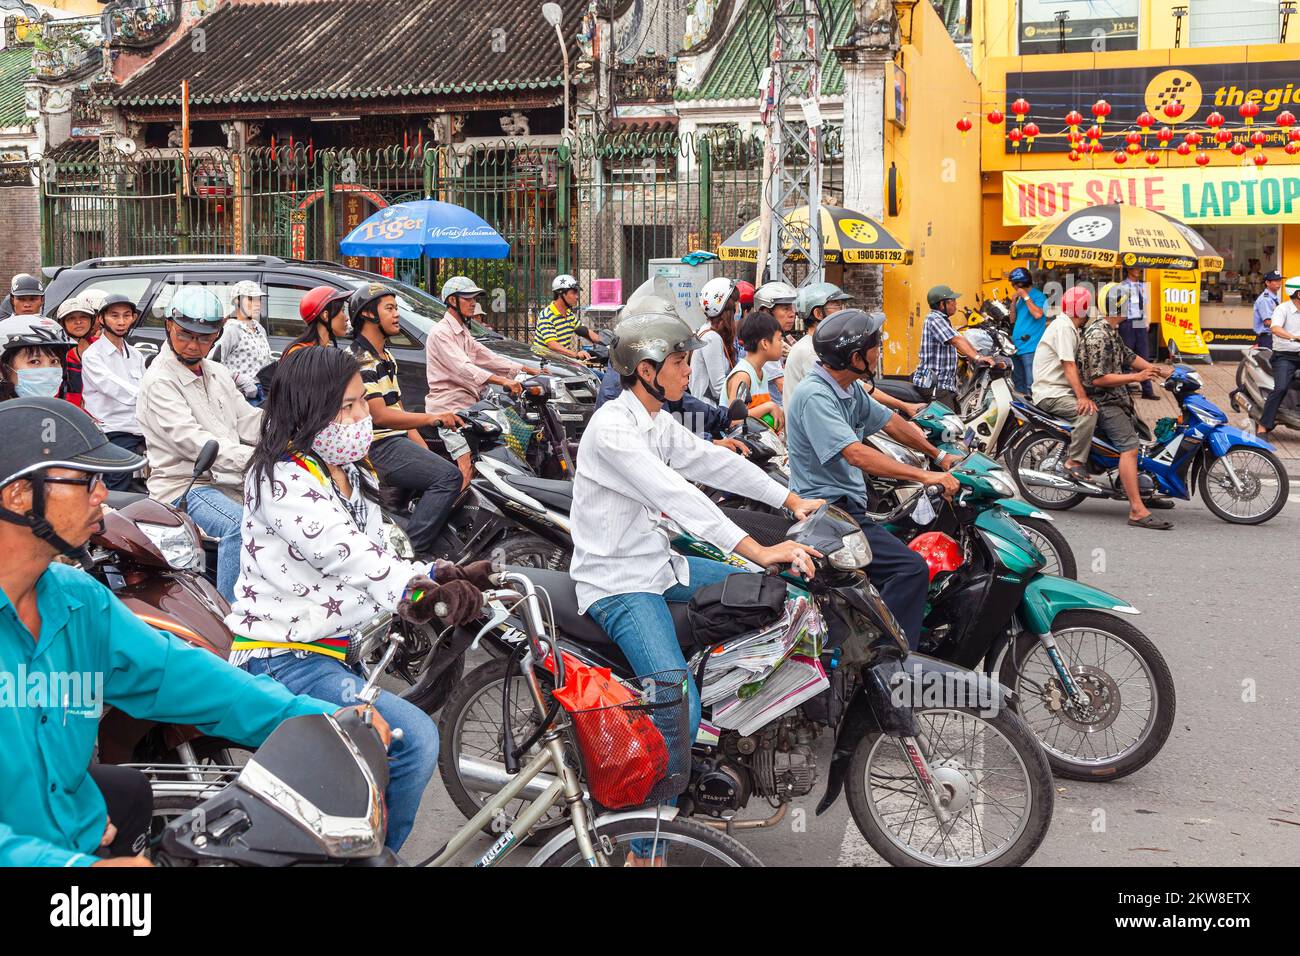 Motorcycle traffic congestion at road junction, Ho Chi Minh City, Vietnam Stock Photo